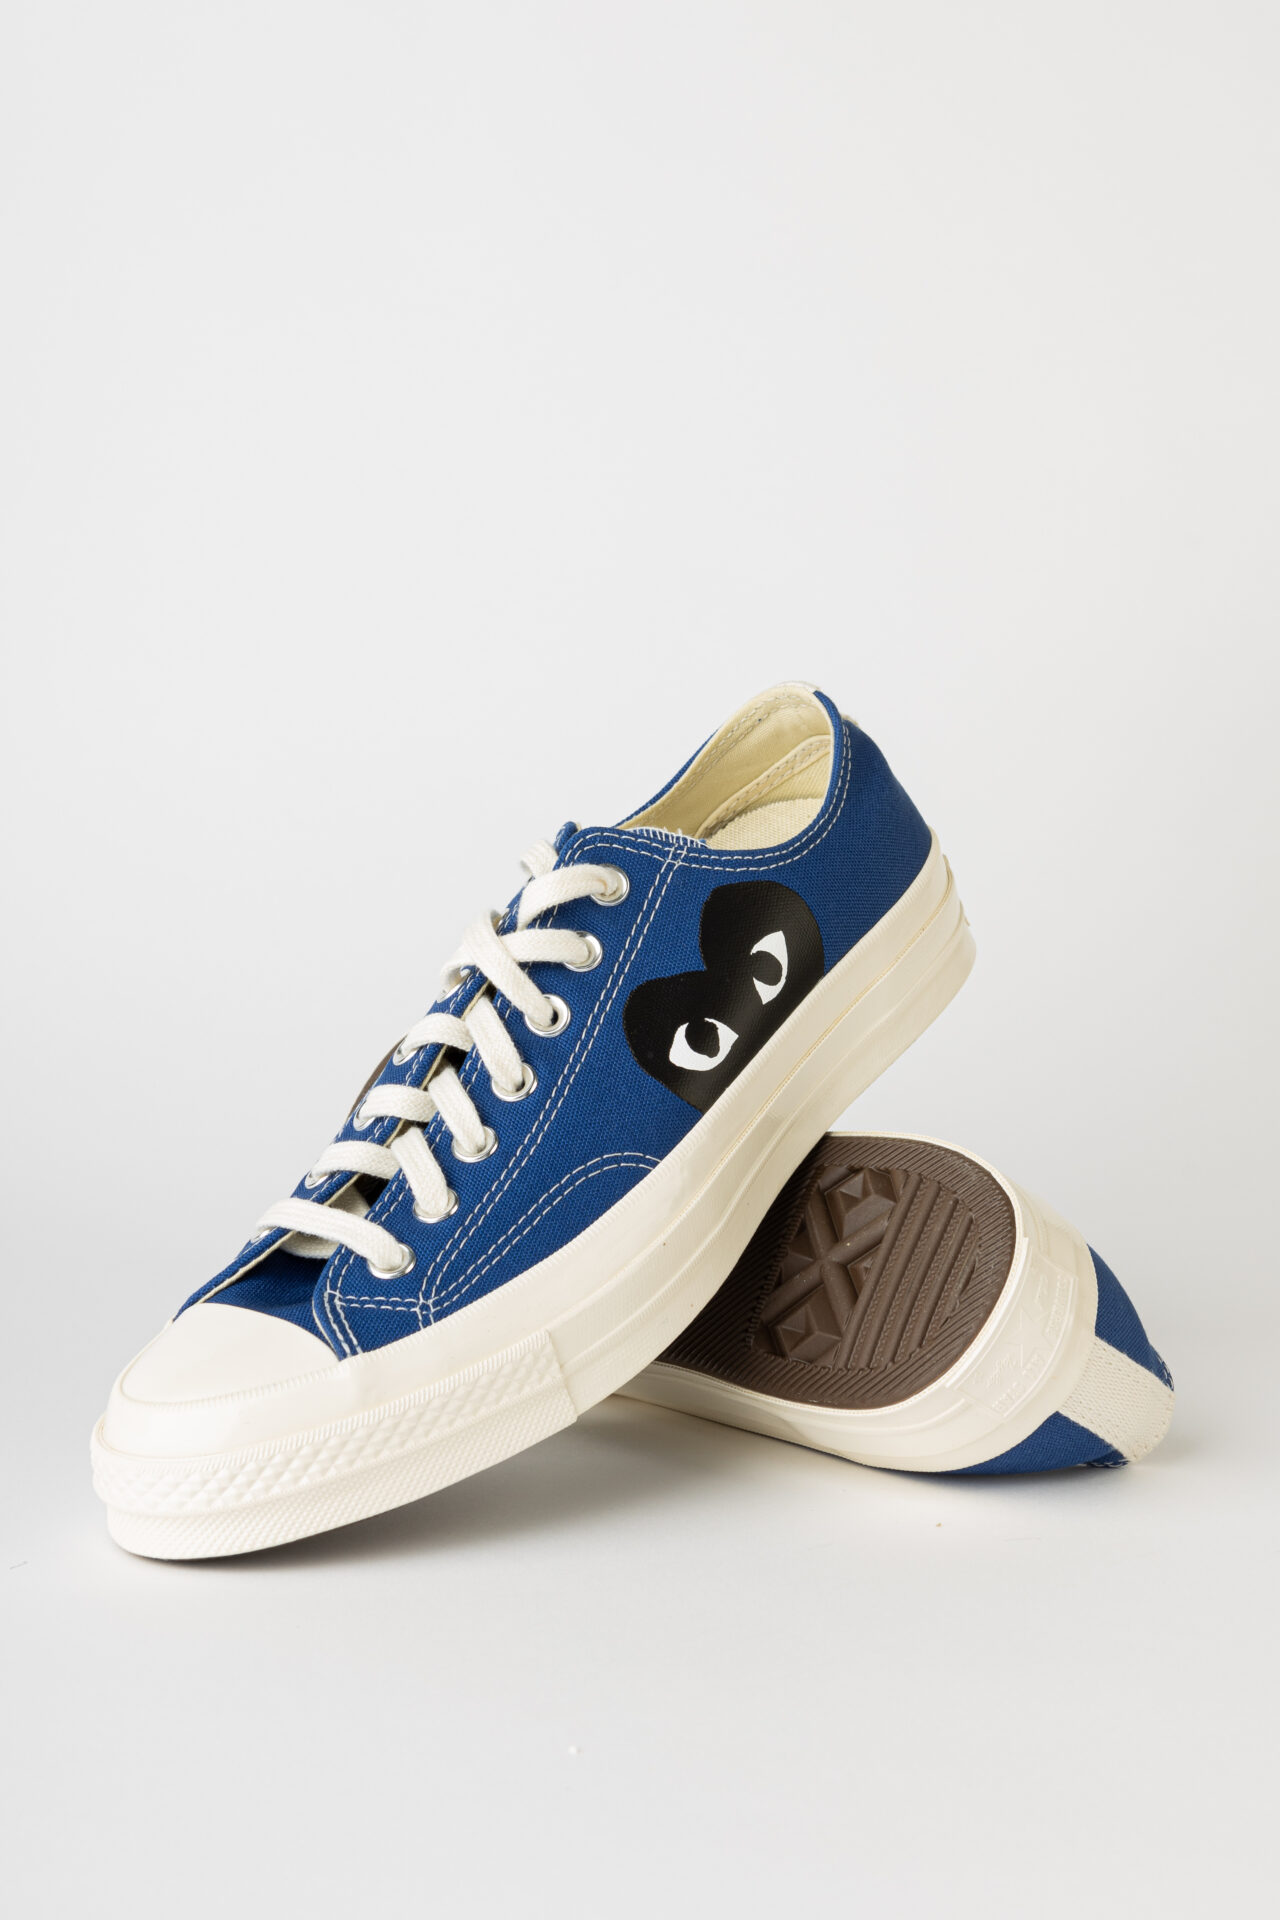 Comme Des Garcons Play - Blue Converse Chuck Taylor Low Top - Schwittenberg